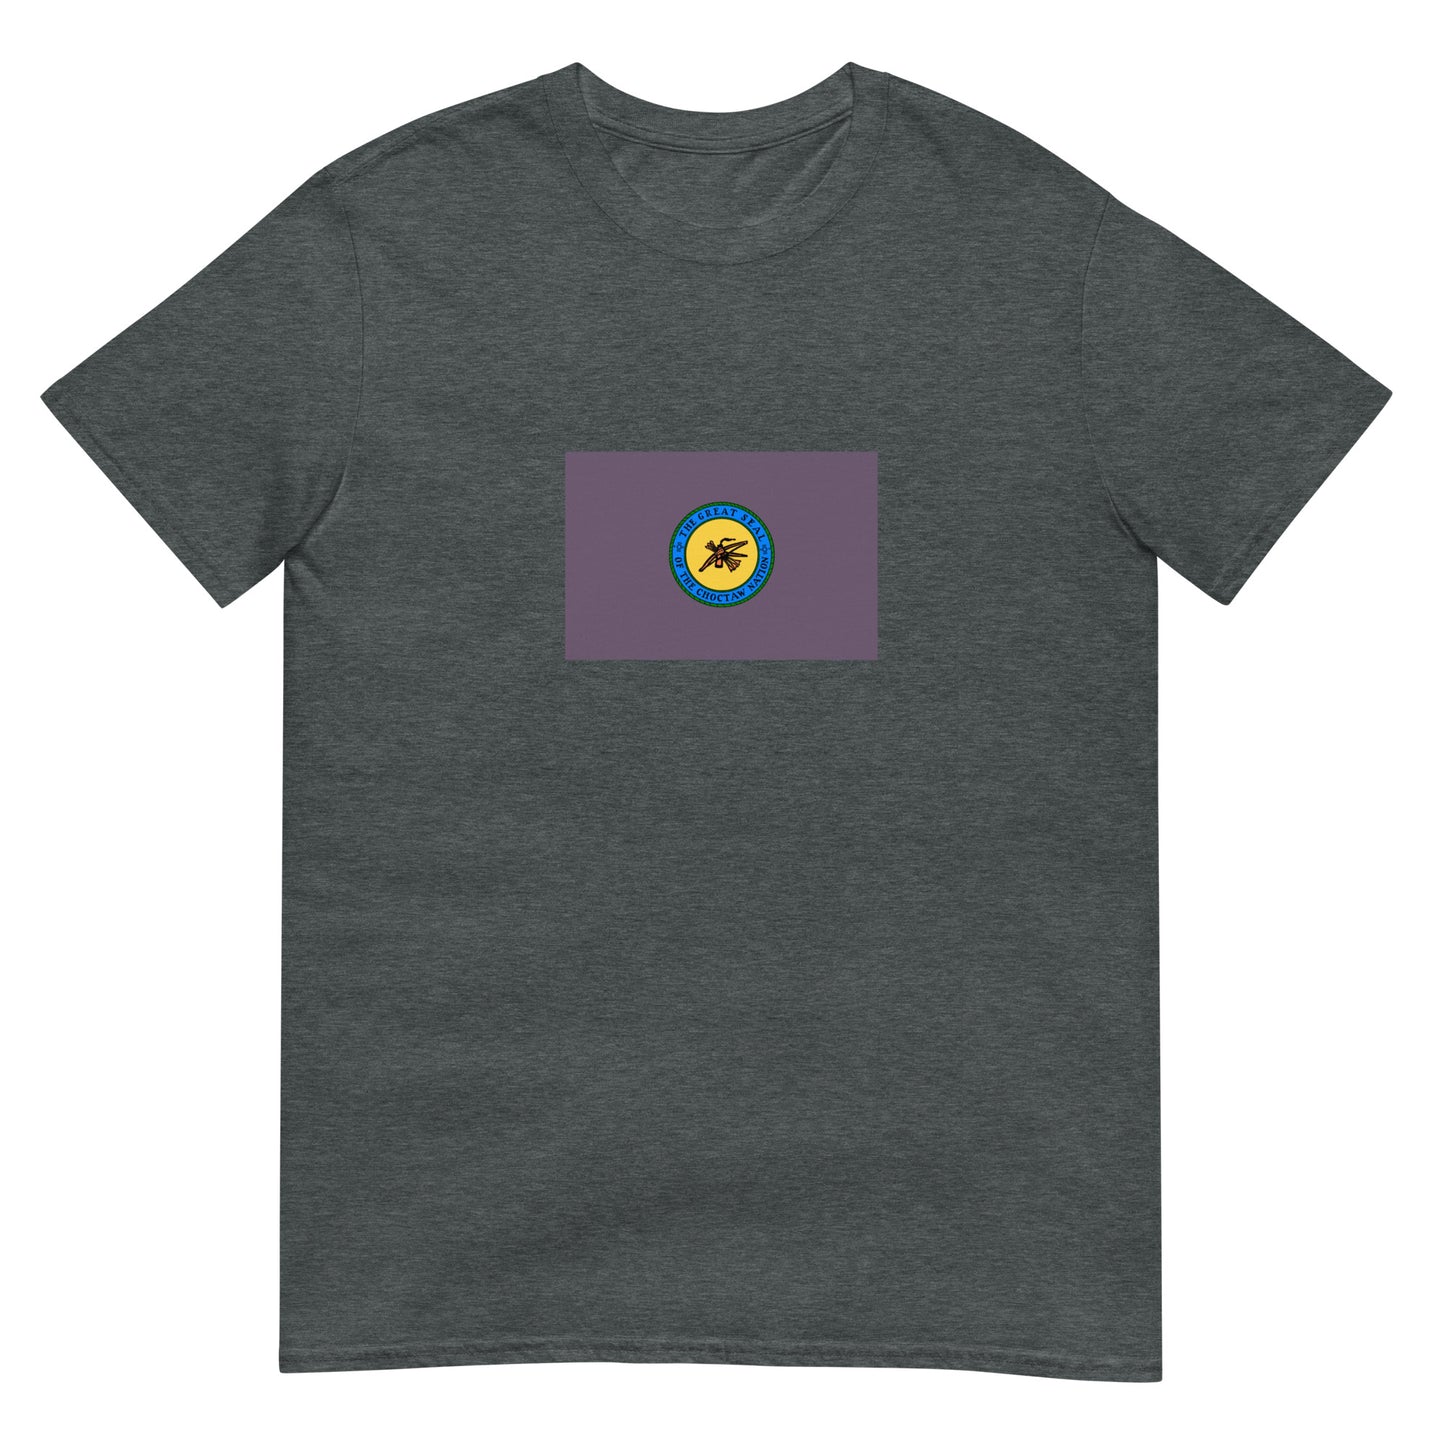 USA - Choctaw people | Native American Flag Interactive T-shirt